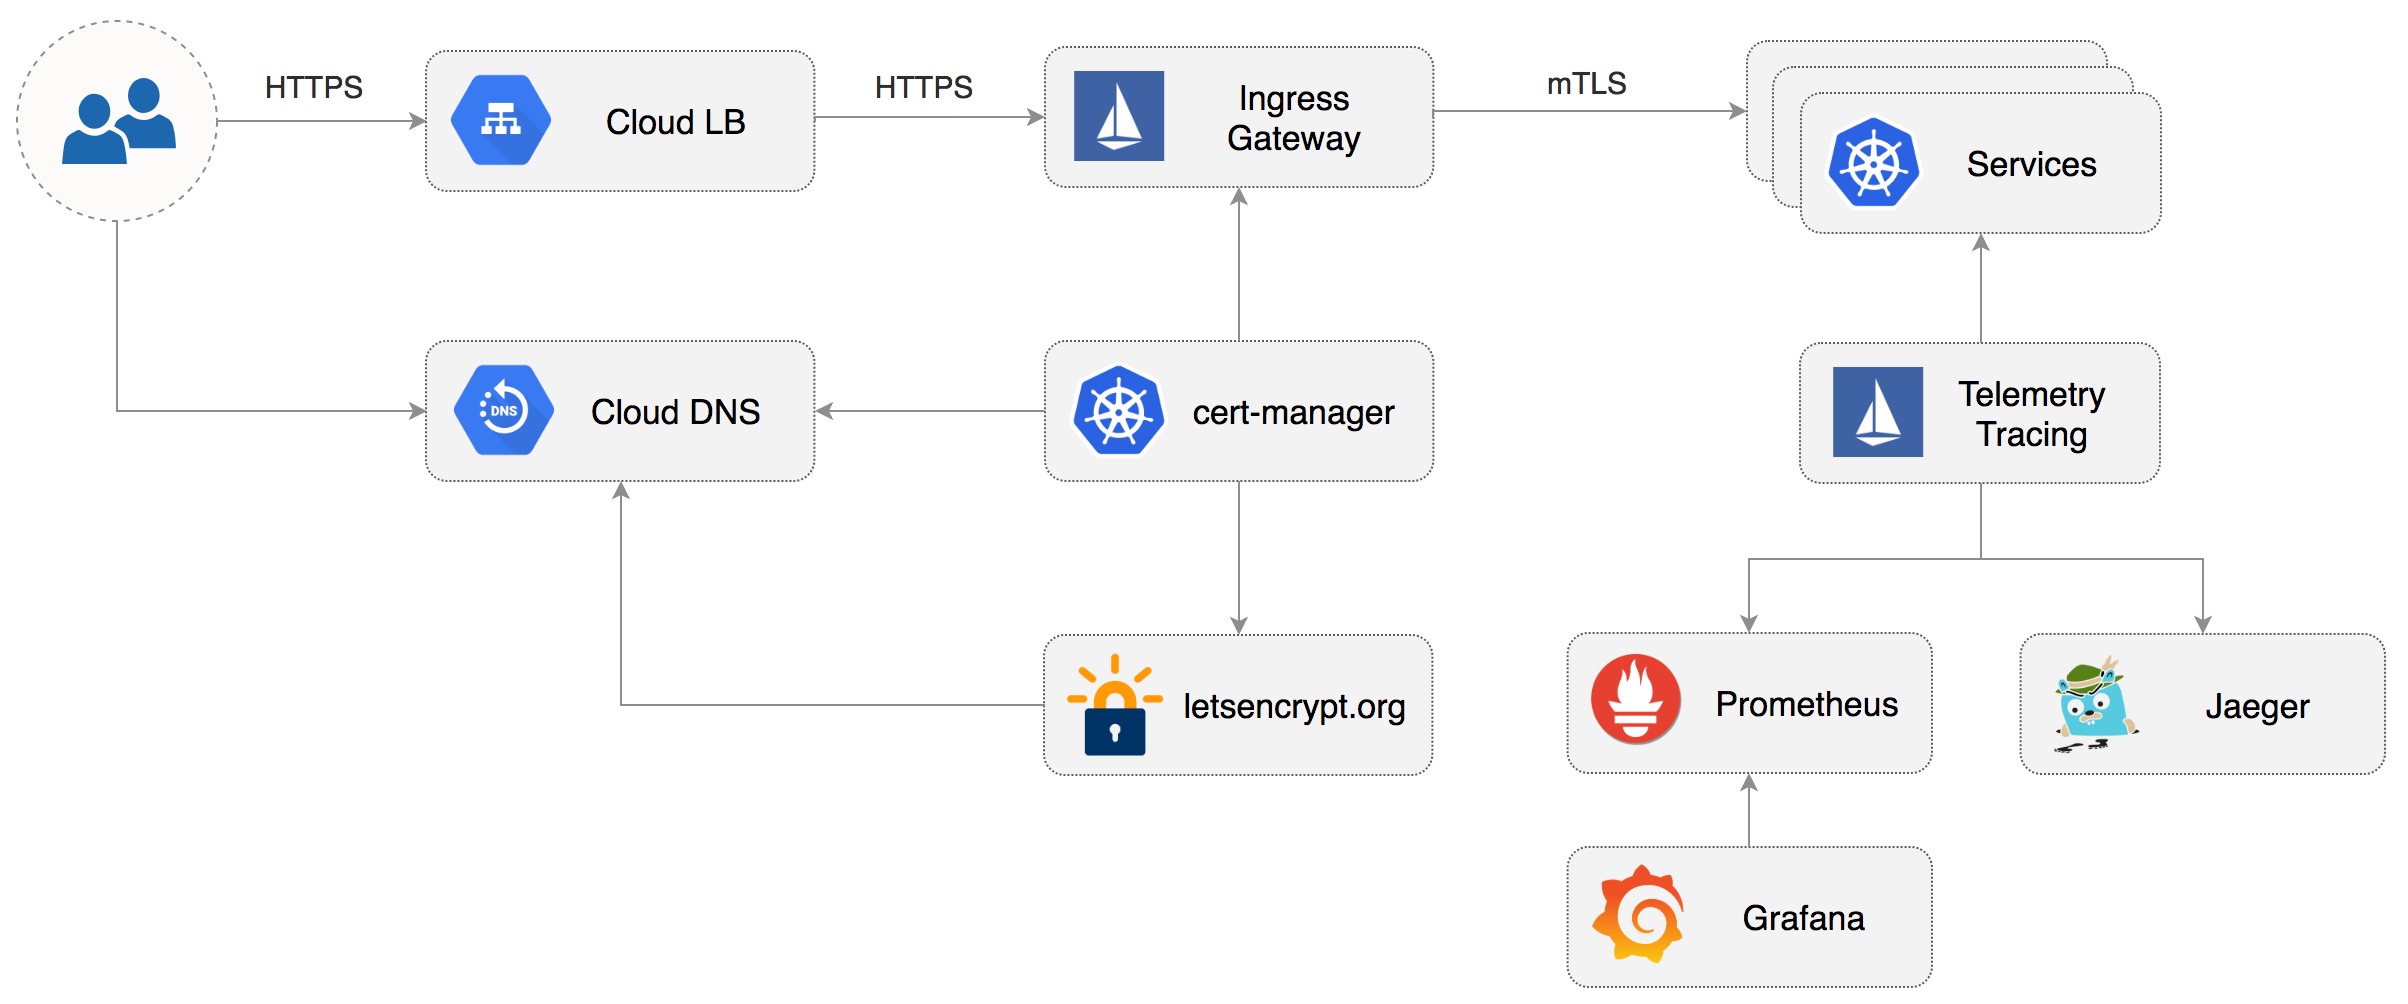 istio-gcp-overview.png